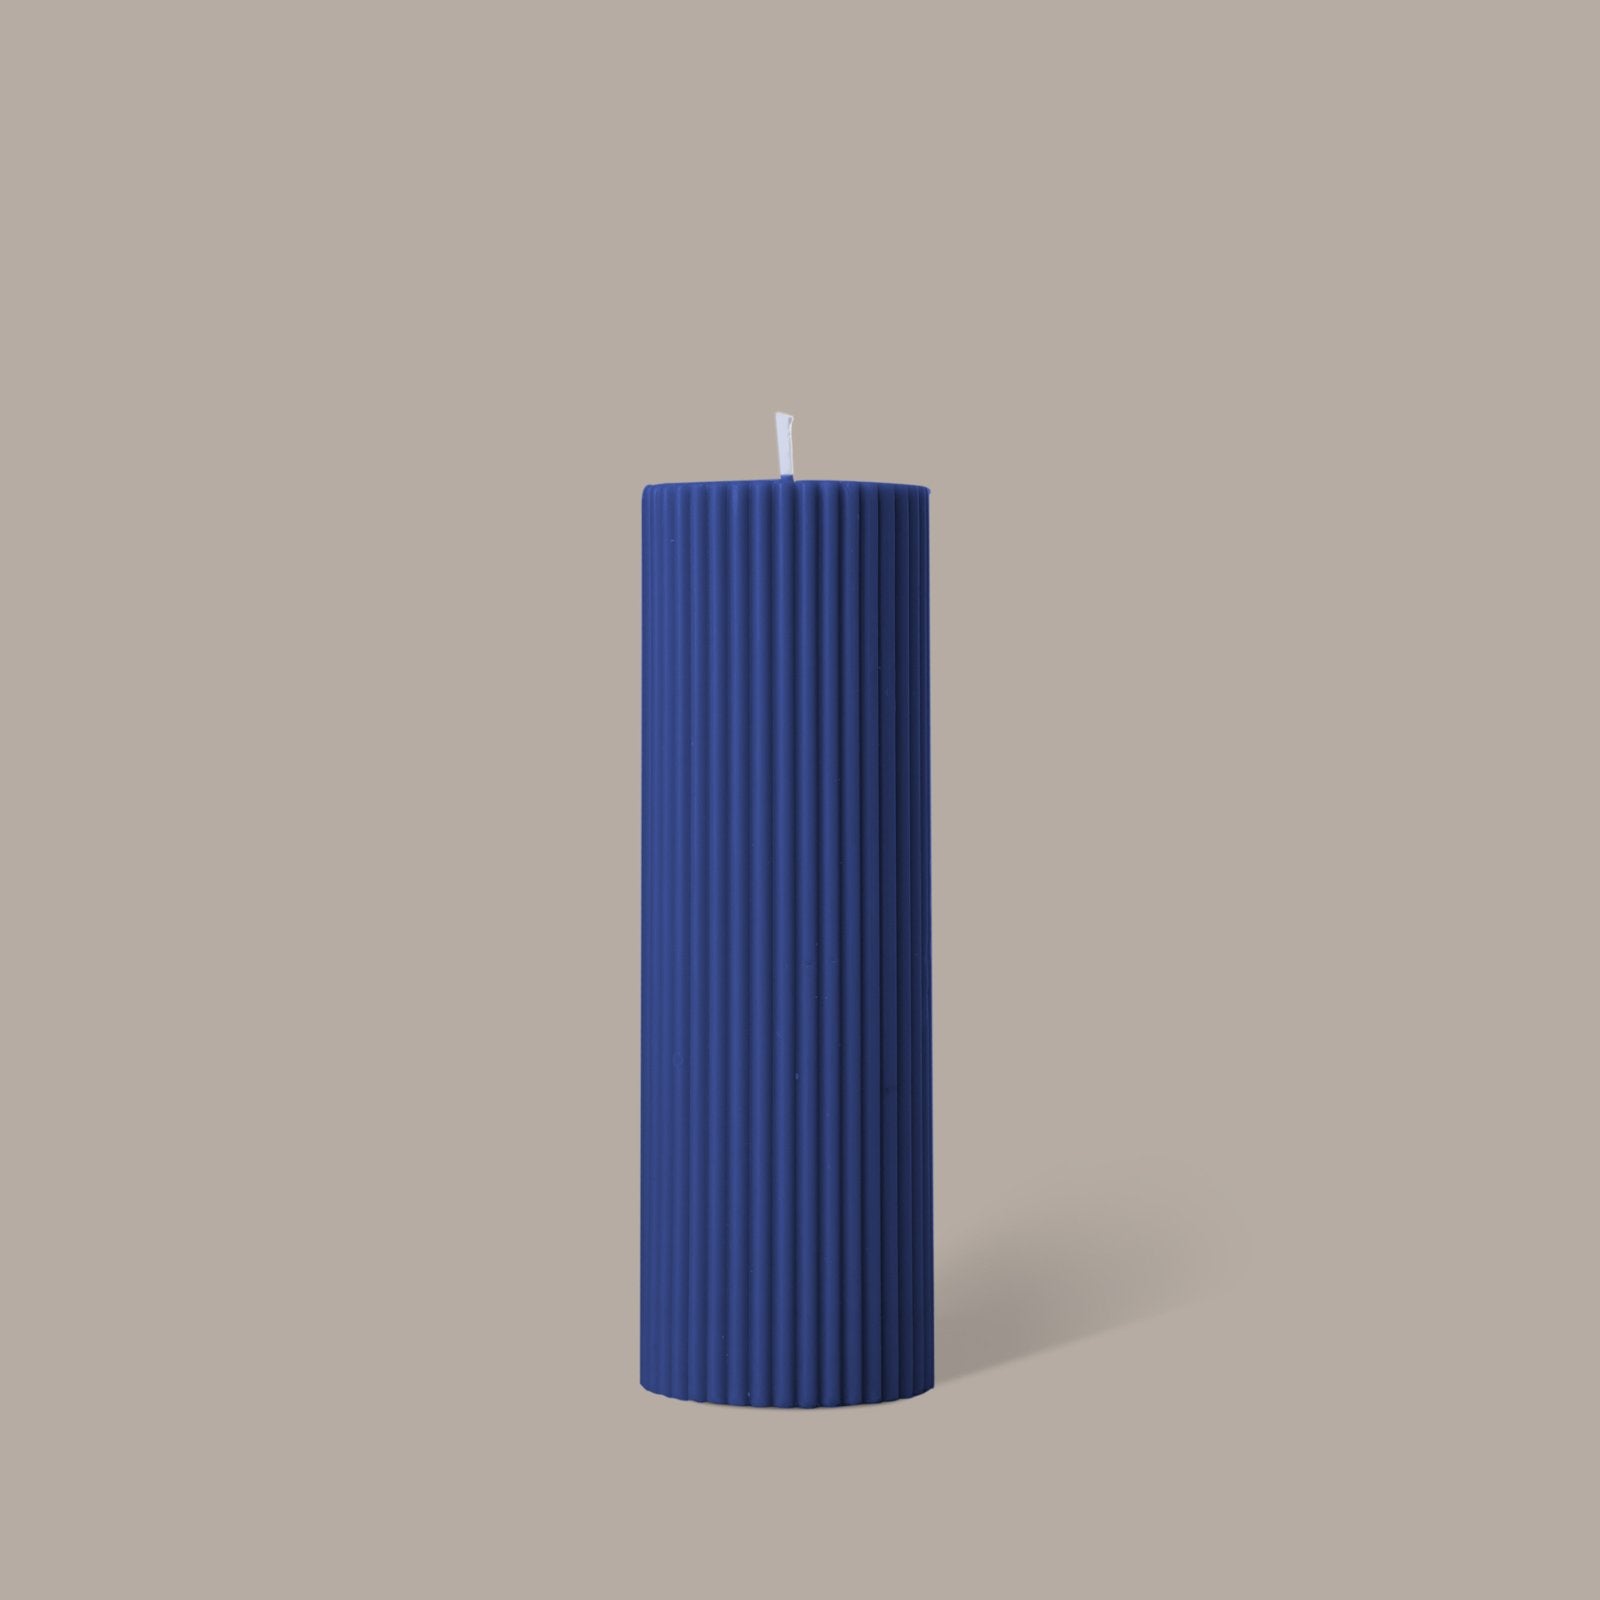 Our Column pillar candles are made from refined plant based wax and good for home decoration. All candles in this collection are unscented. Please use a candle holder or candle plate underneath